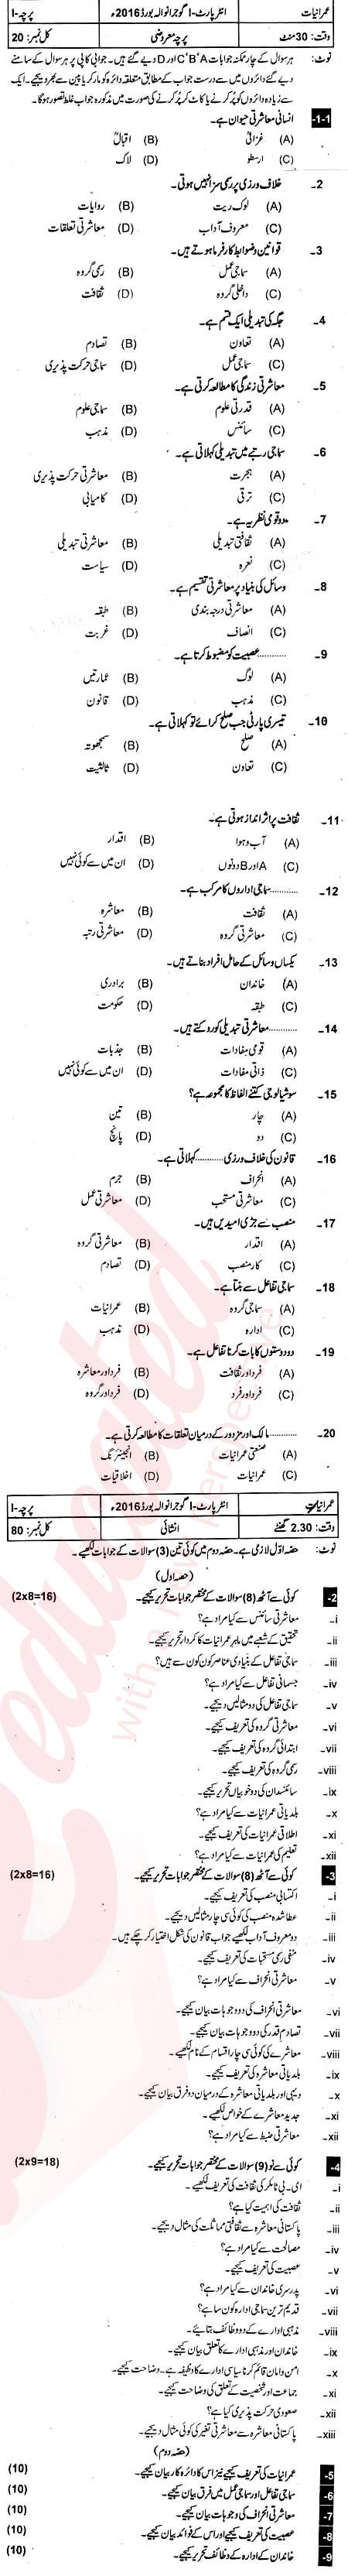 Sociology FA Part 1 Past Paper Group 1 BISE Gujranwala 2016